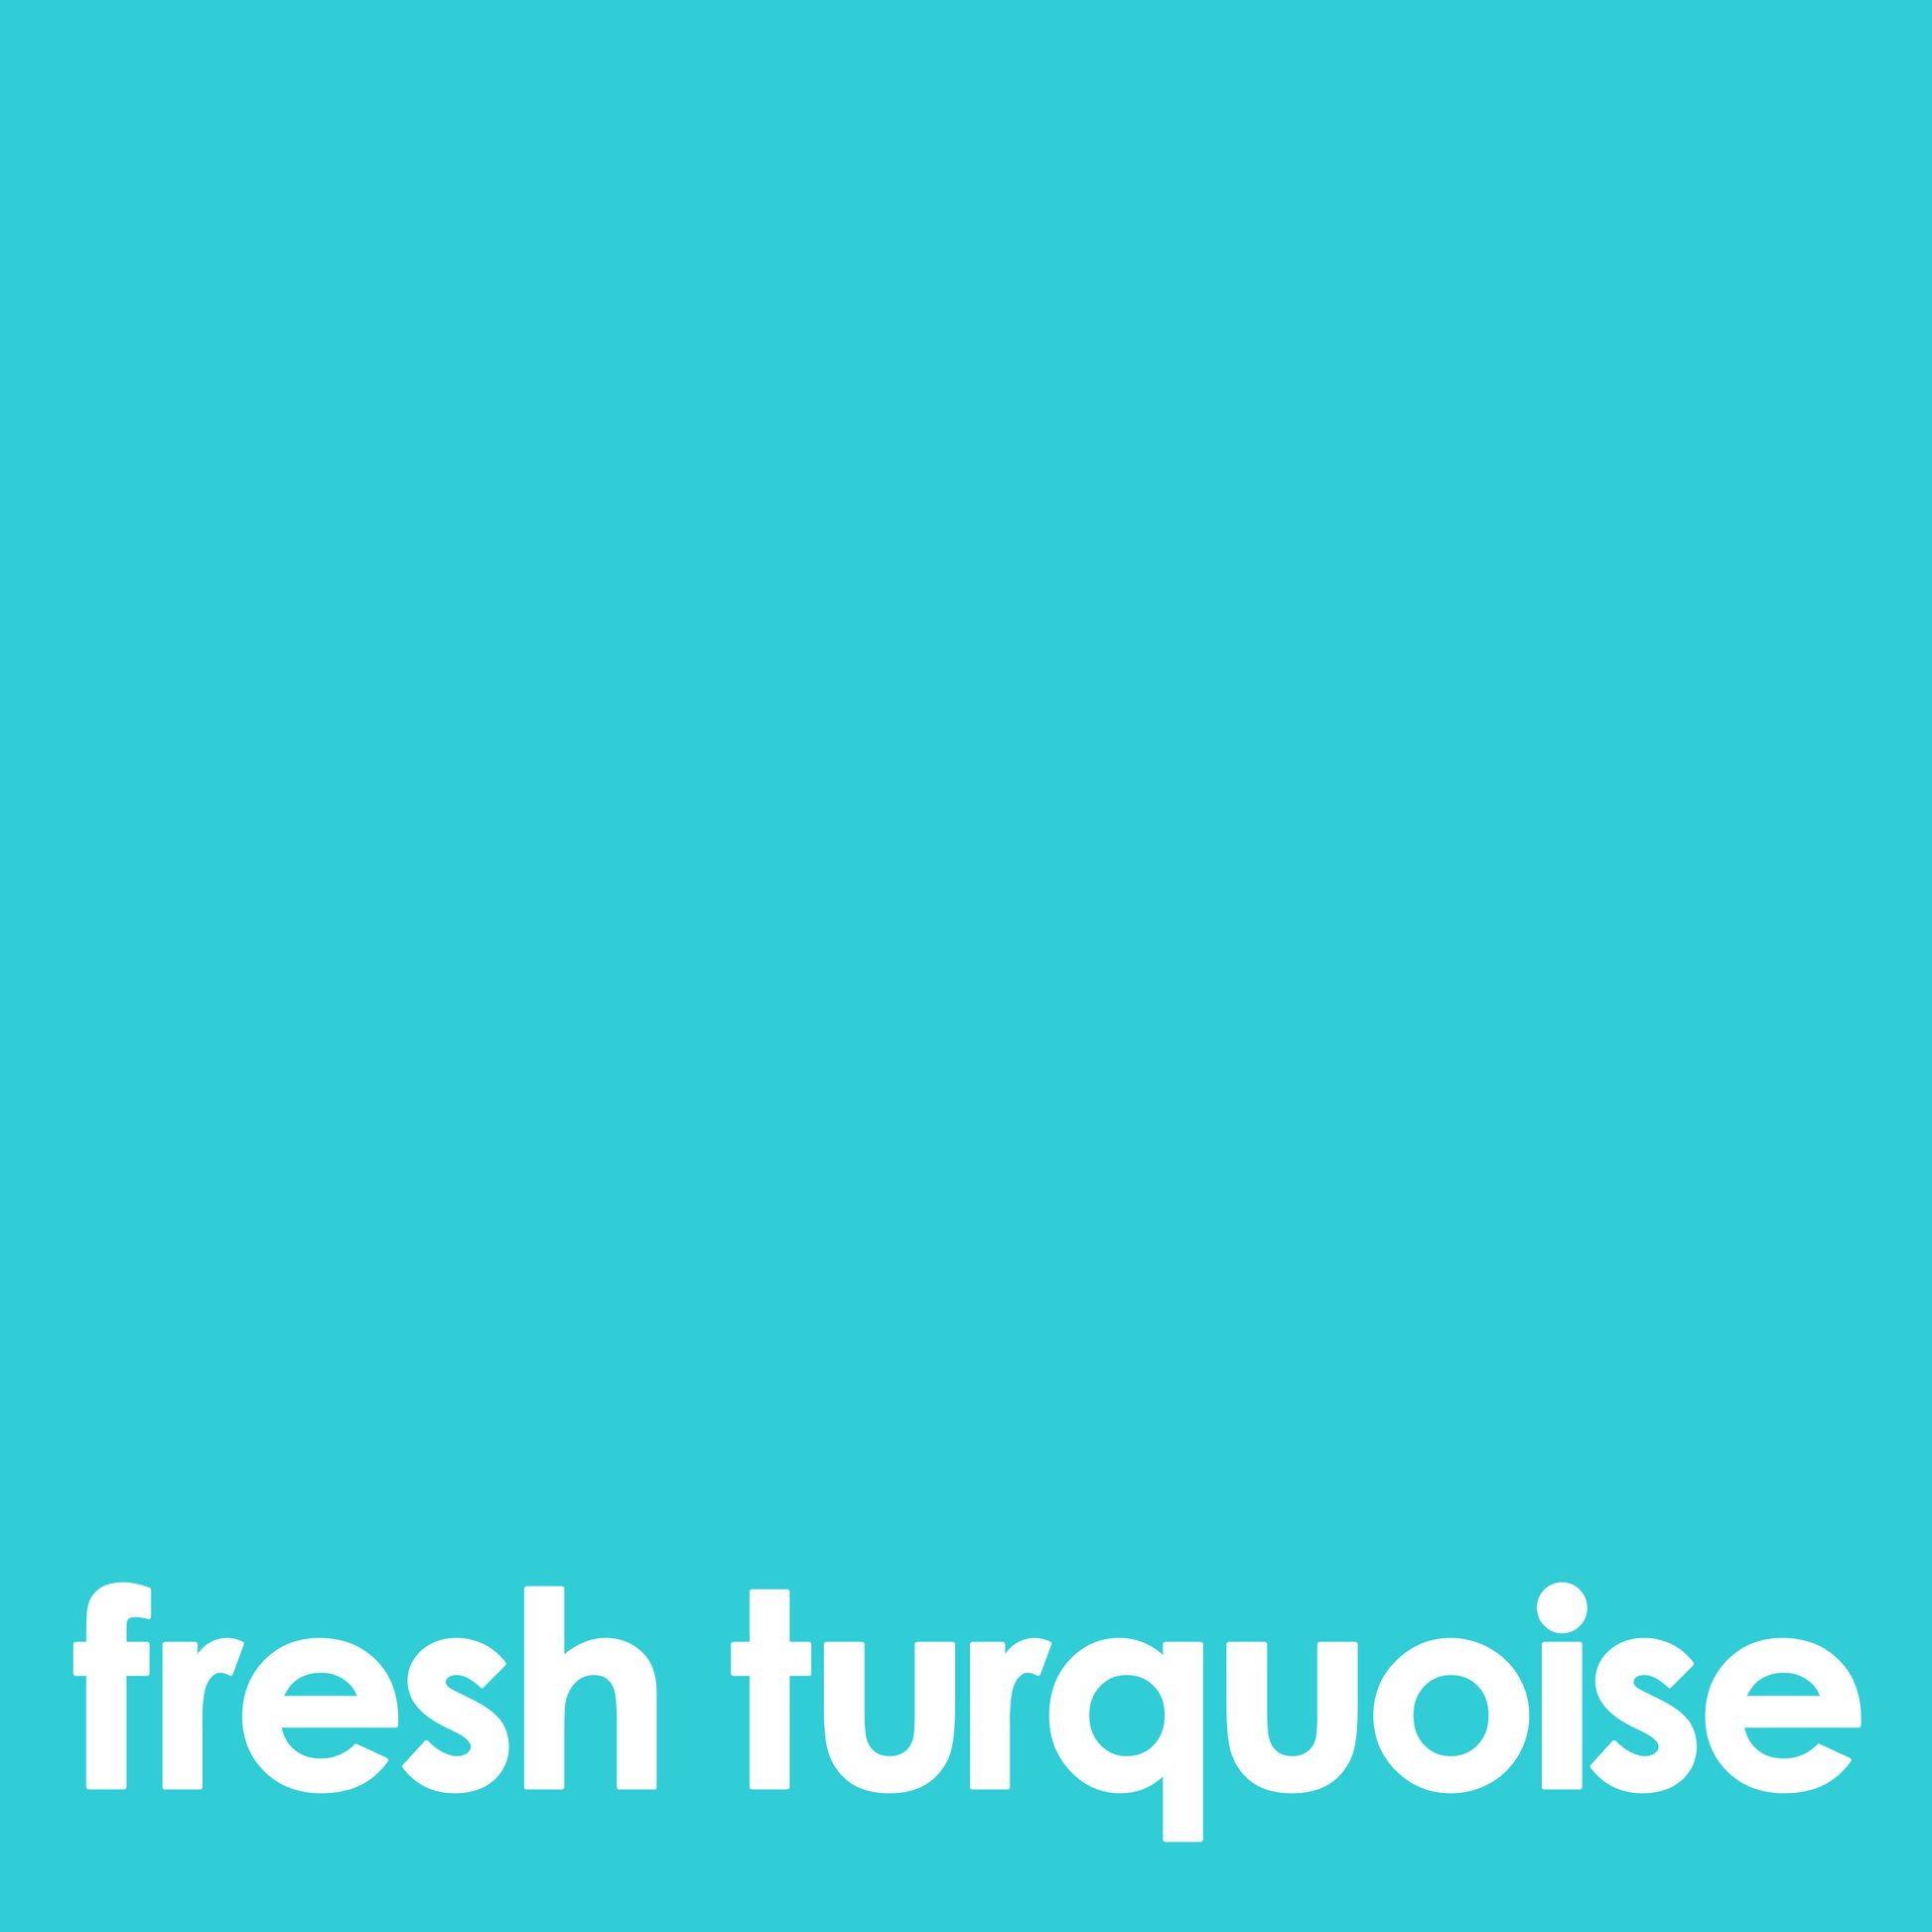 Turquoise background with white text that reads "fresh turquoise".